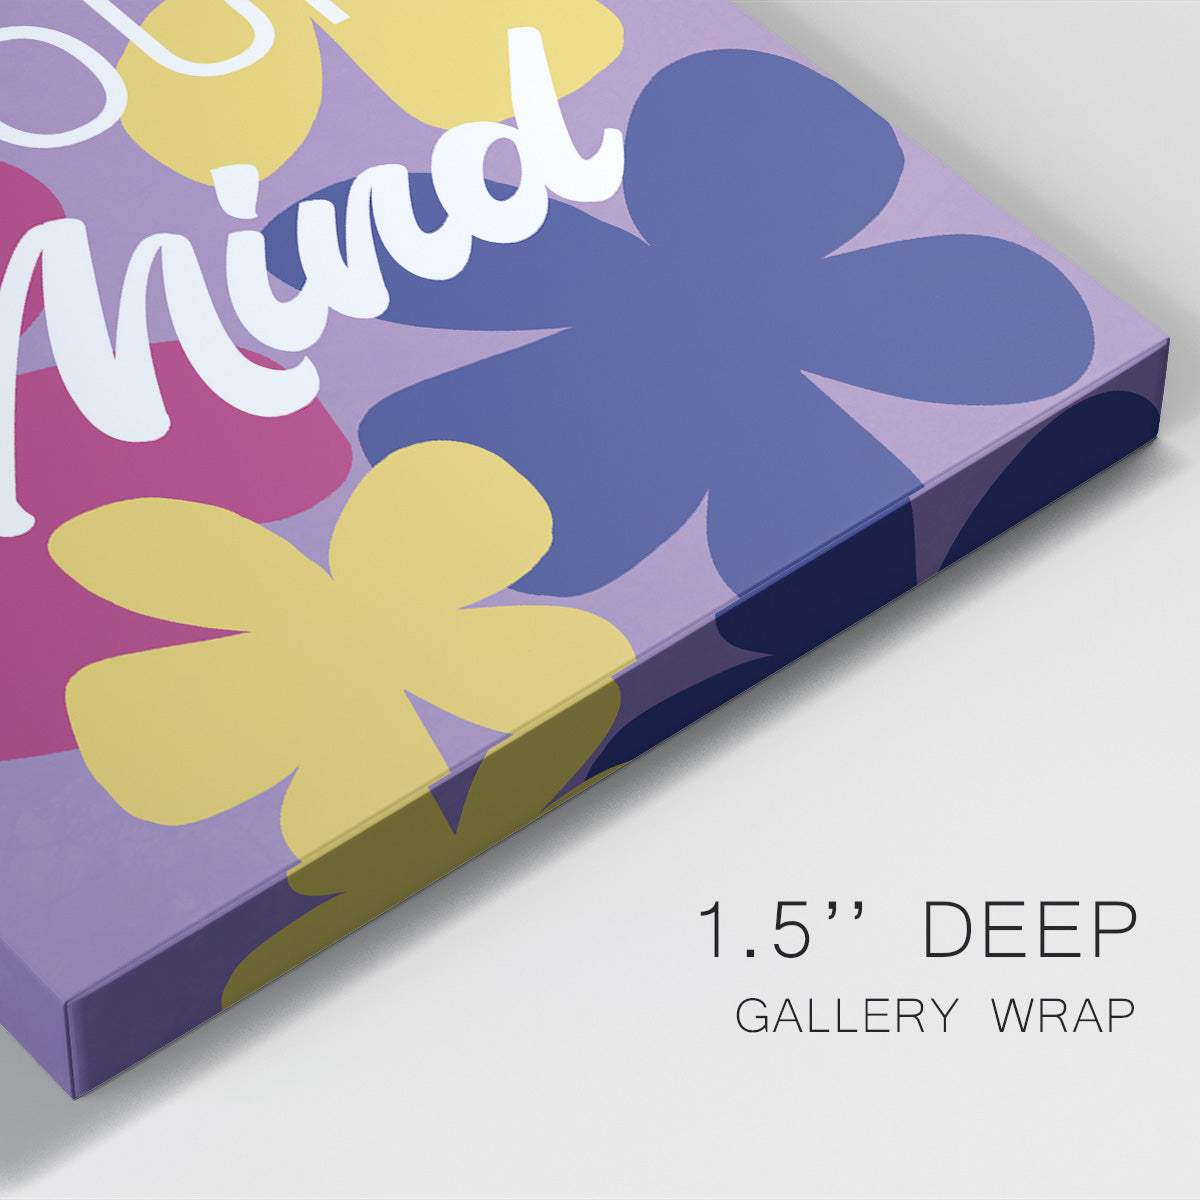 Free Your Mind Premium Gallery Wrapped Canvas - Ready to Hang